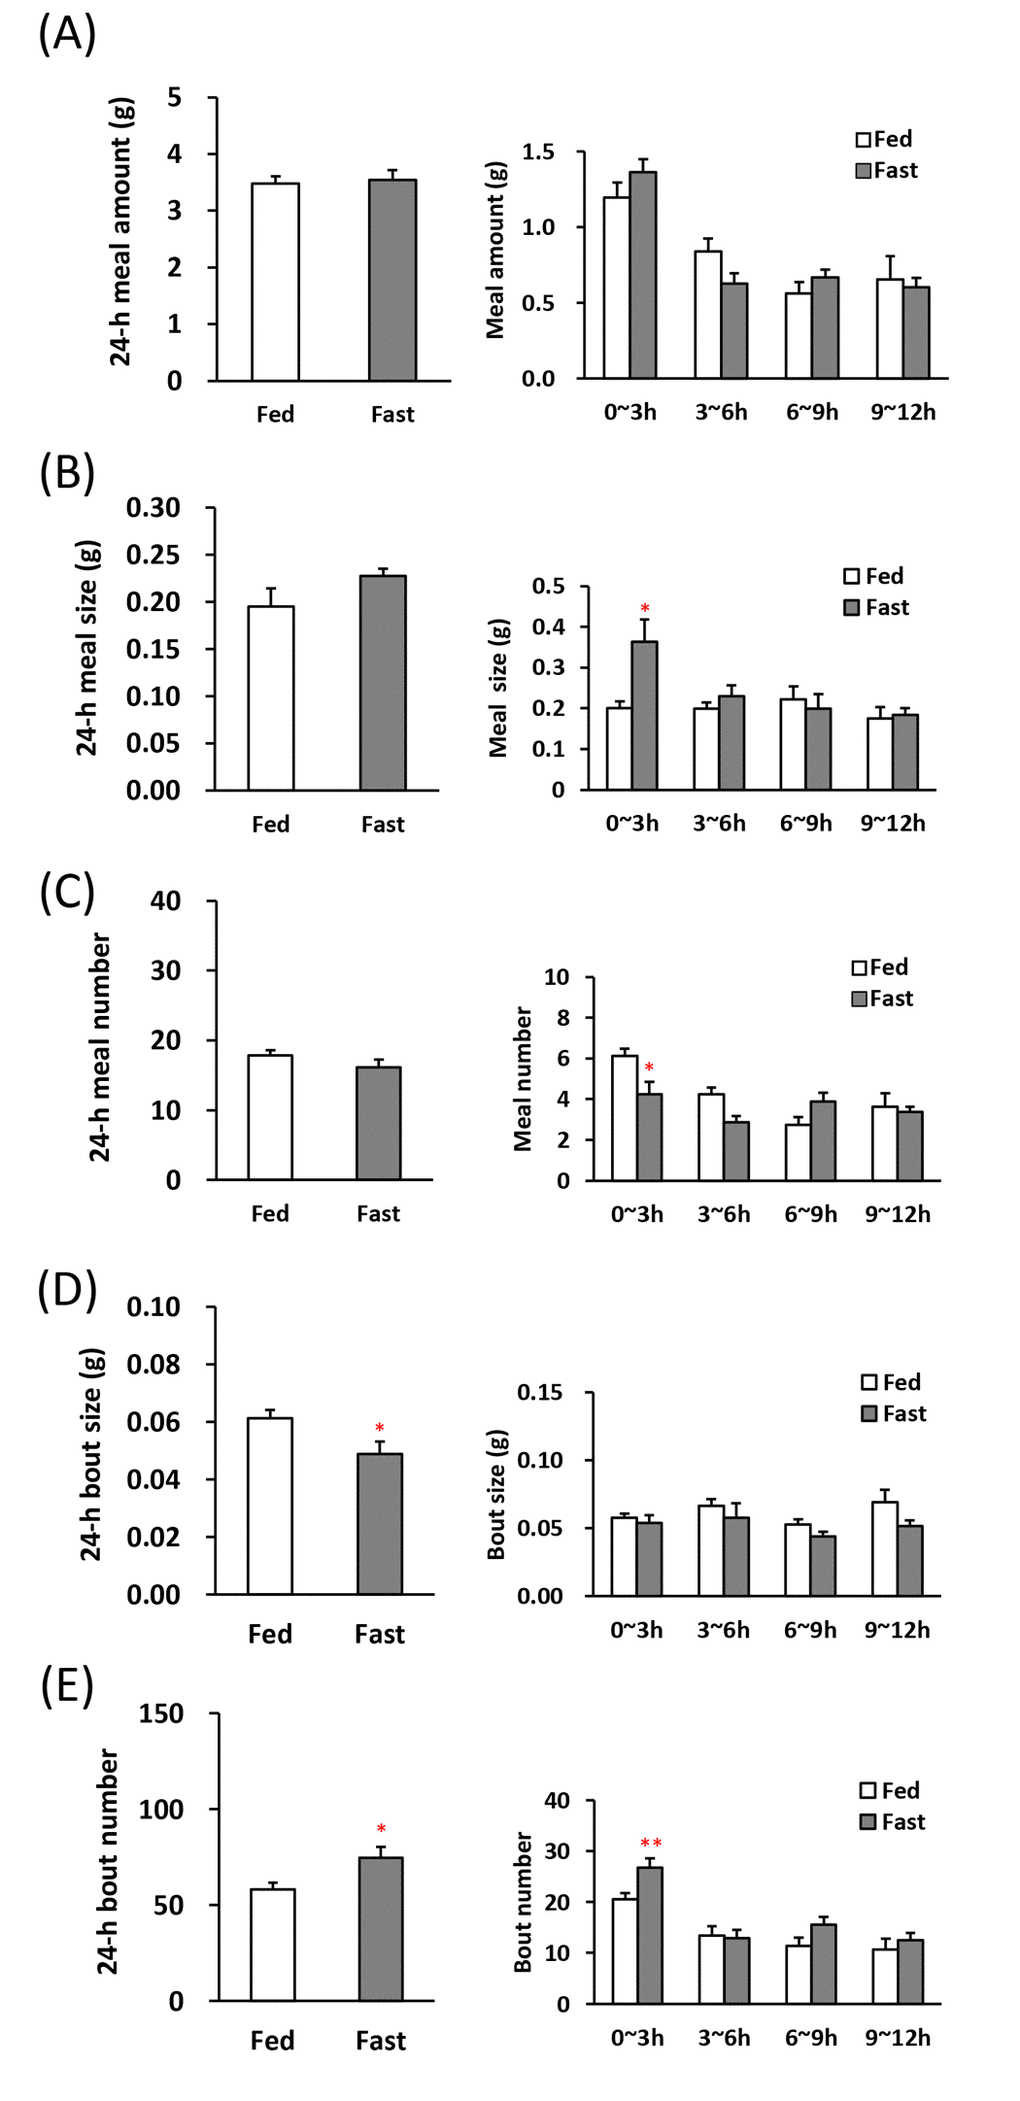 Microstructure analysis after 24-h fasting in young mice. (A) left: the 24-h meal amount, right: meal amount per 3 h in the dark phase, (B) left: the 24-h meal size, right: meal size per 3 h in the dark phase, (C) left: the 24-h meal number, right: meal number per 3 h in the dark phase, (D) left: the 24-h bout size, right: bout size per 3 h in the dark phase, (E) left: the 24-h bout number, right: bout number per 3 h in the dark phase. *, **; P 